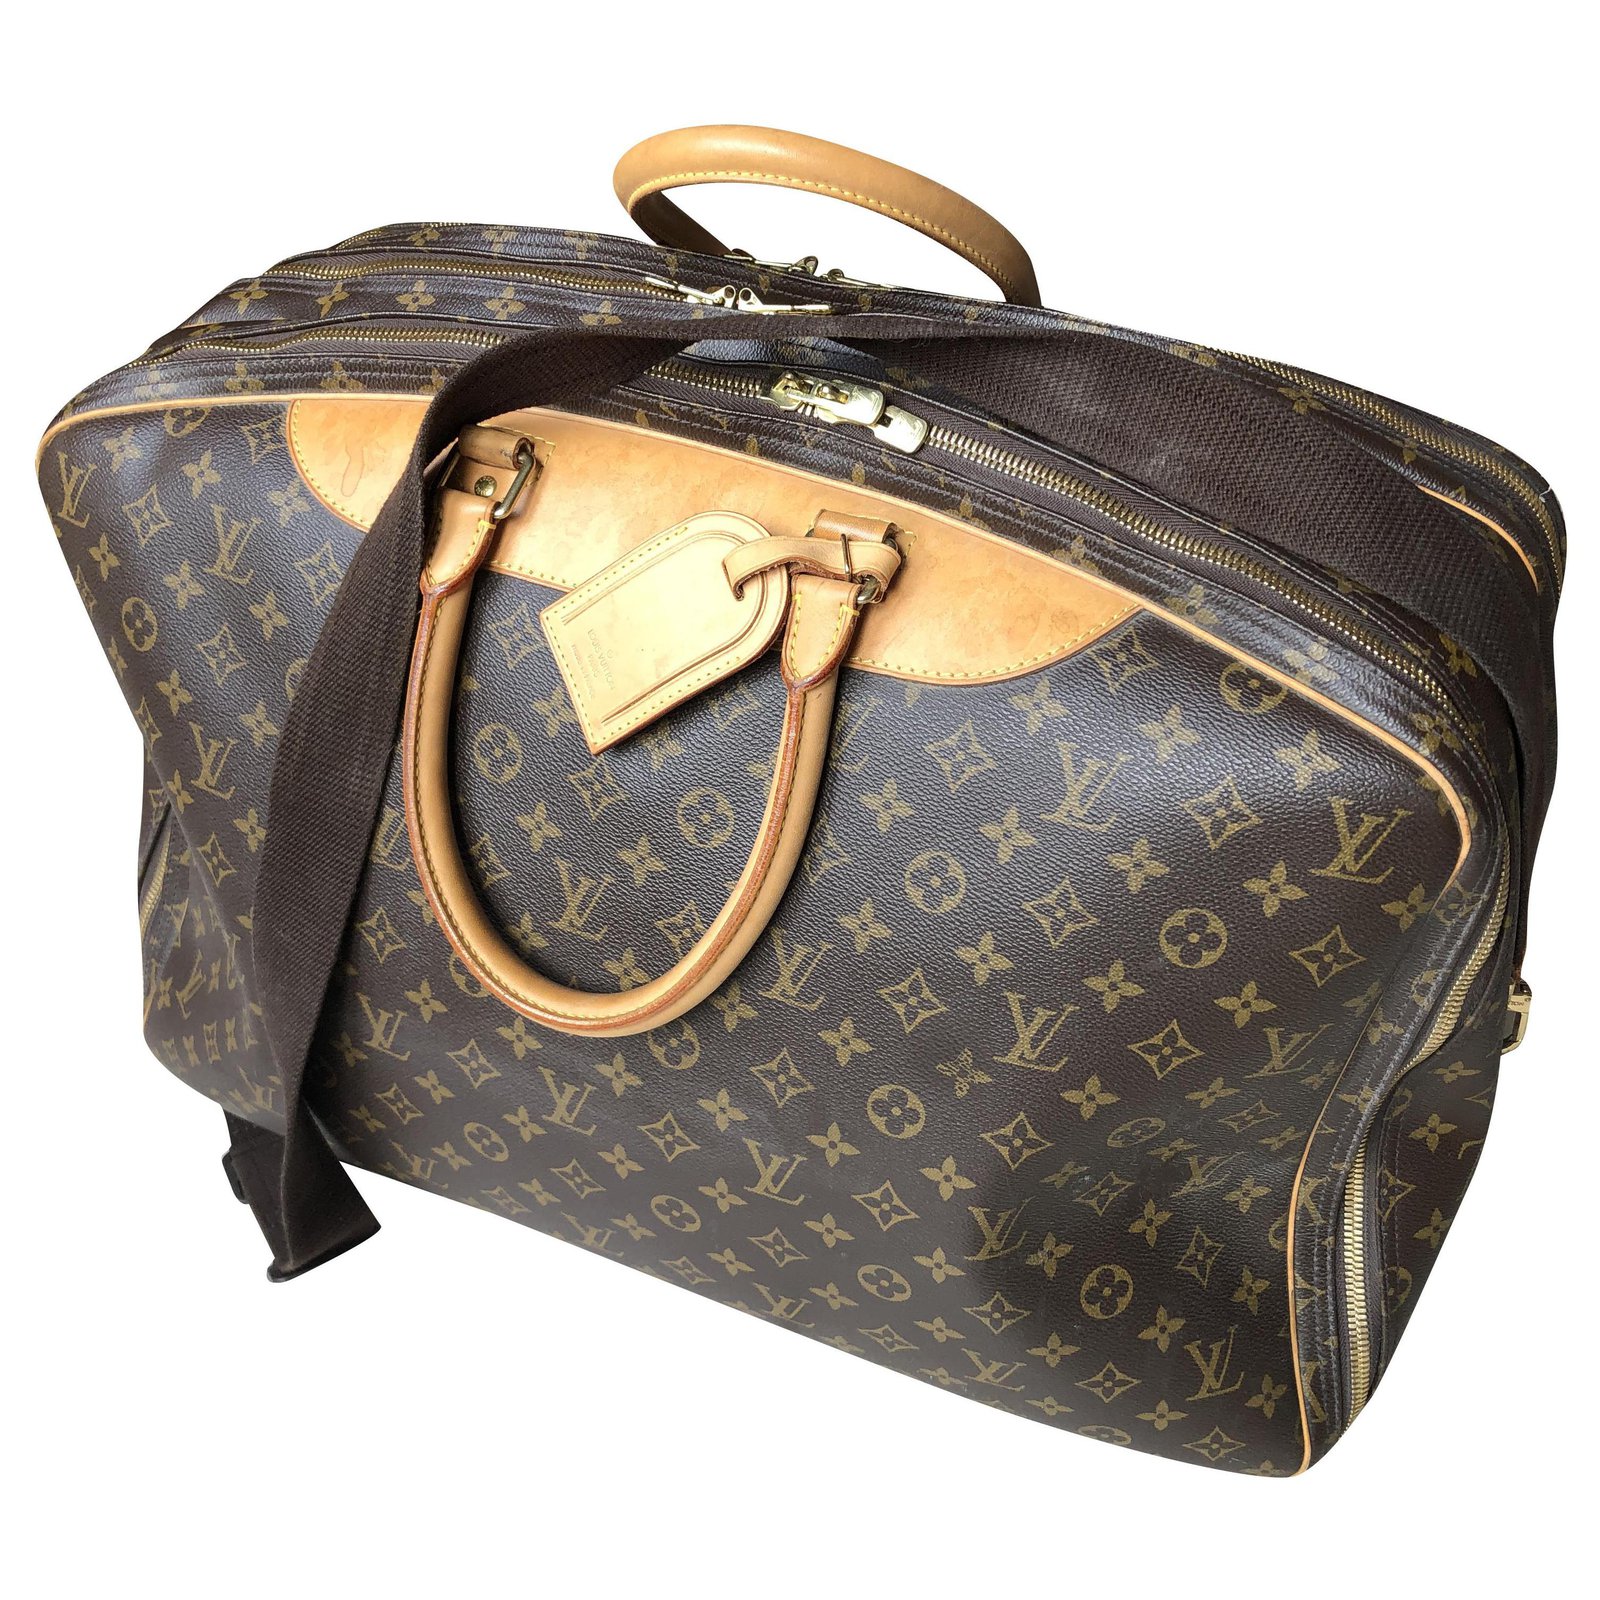 JUST ADDED - Set Of (3) LOUIS VUITTON Dust Cover Jackets For Handbags